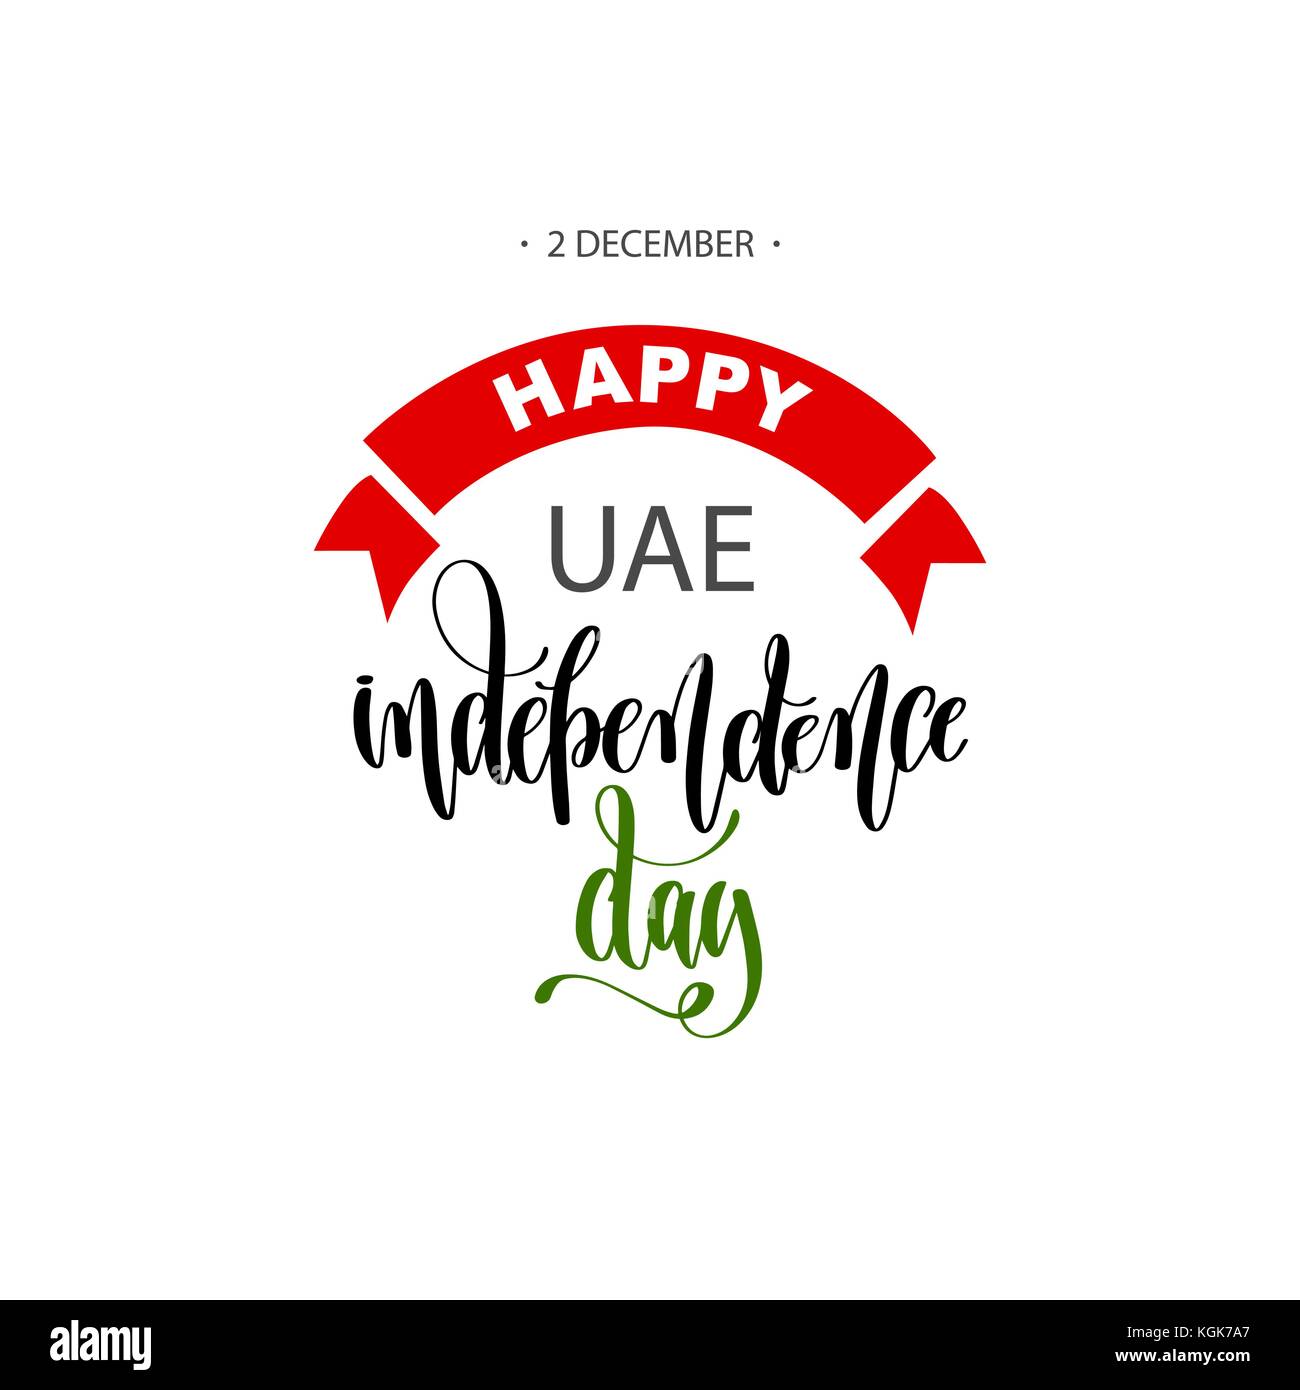 happy independence day UAE 2 december hand lettering poster Stock